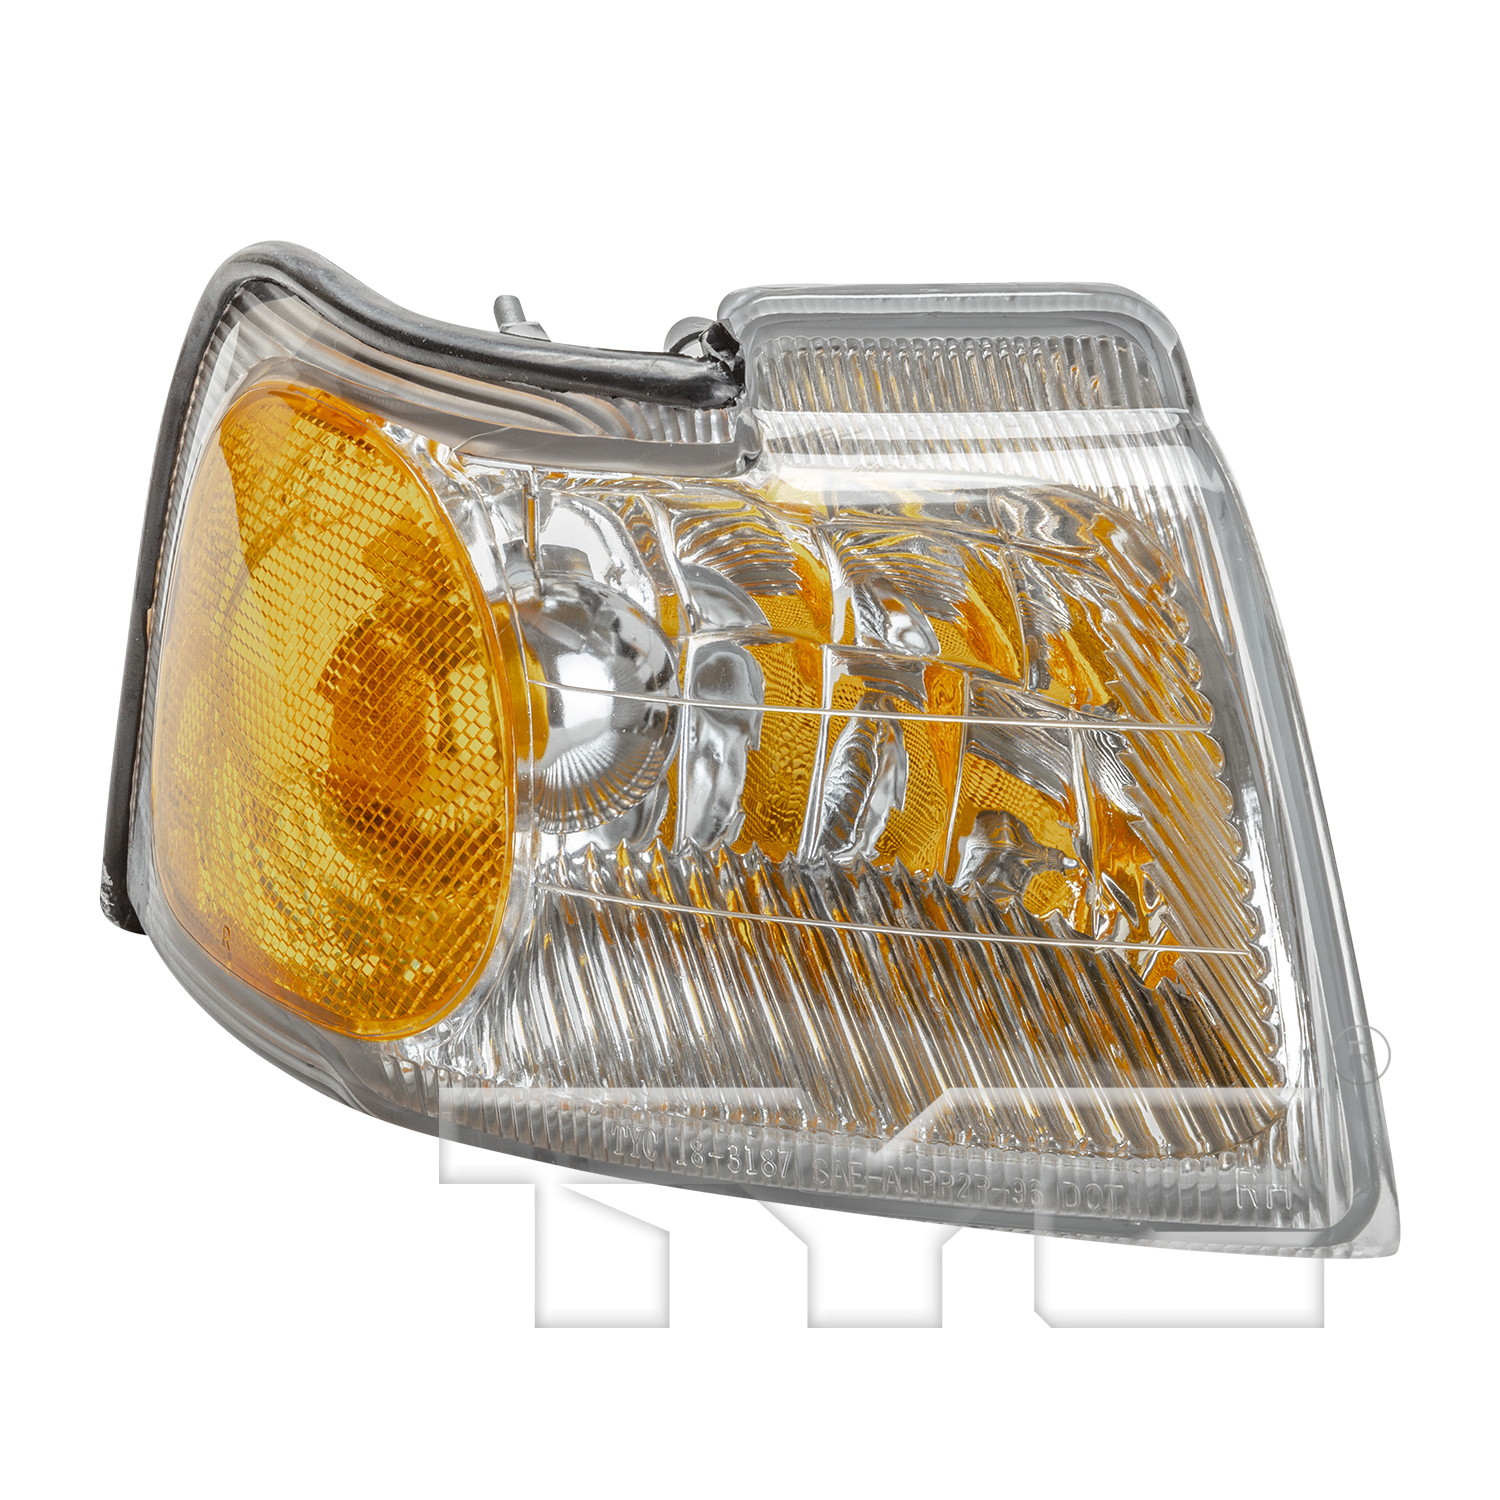 Aftermarket LAMPS for MERCURY - COUGAR, COUGAR,96-97,RT Parklamp assy